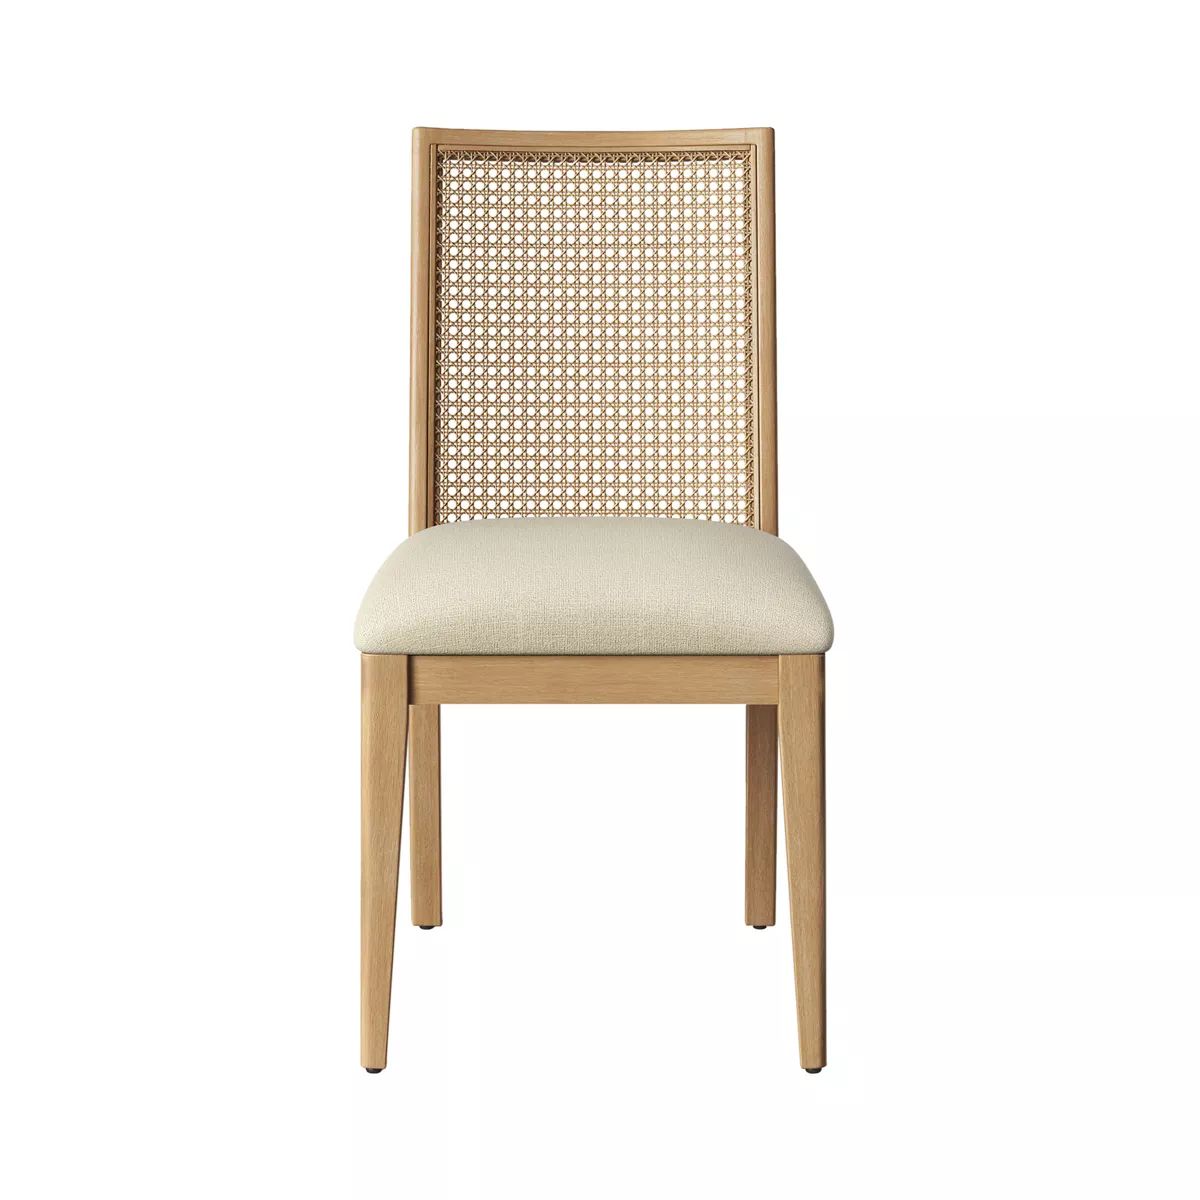 Corella Cane and Wood Dining Chair Natural - Threshold™ | Target